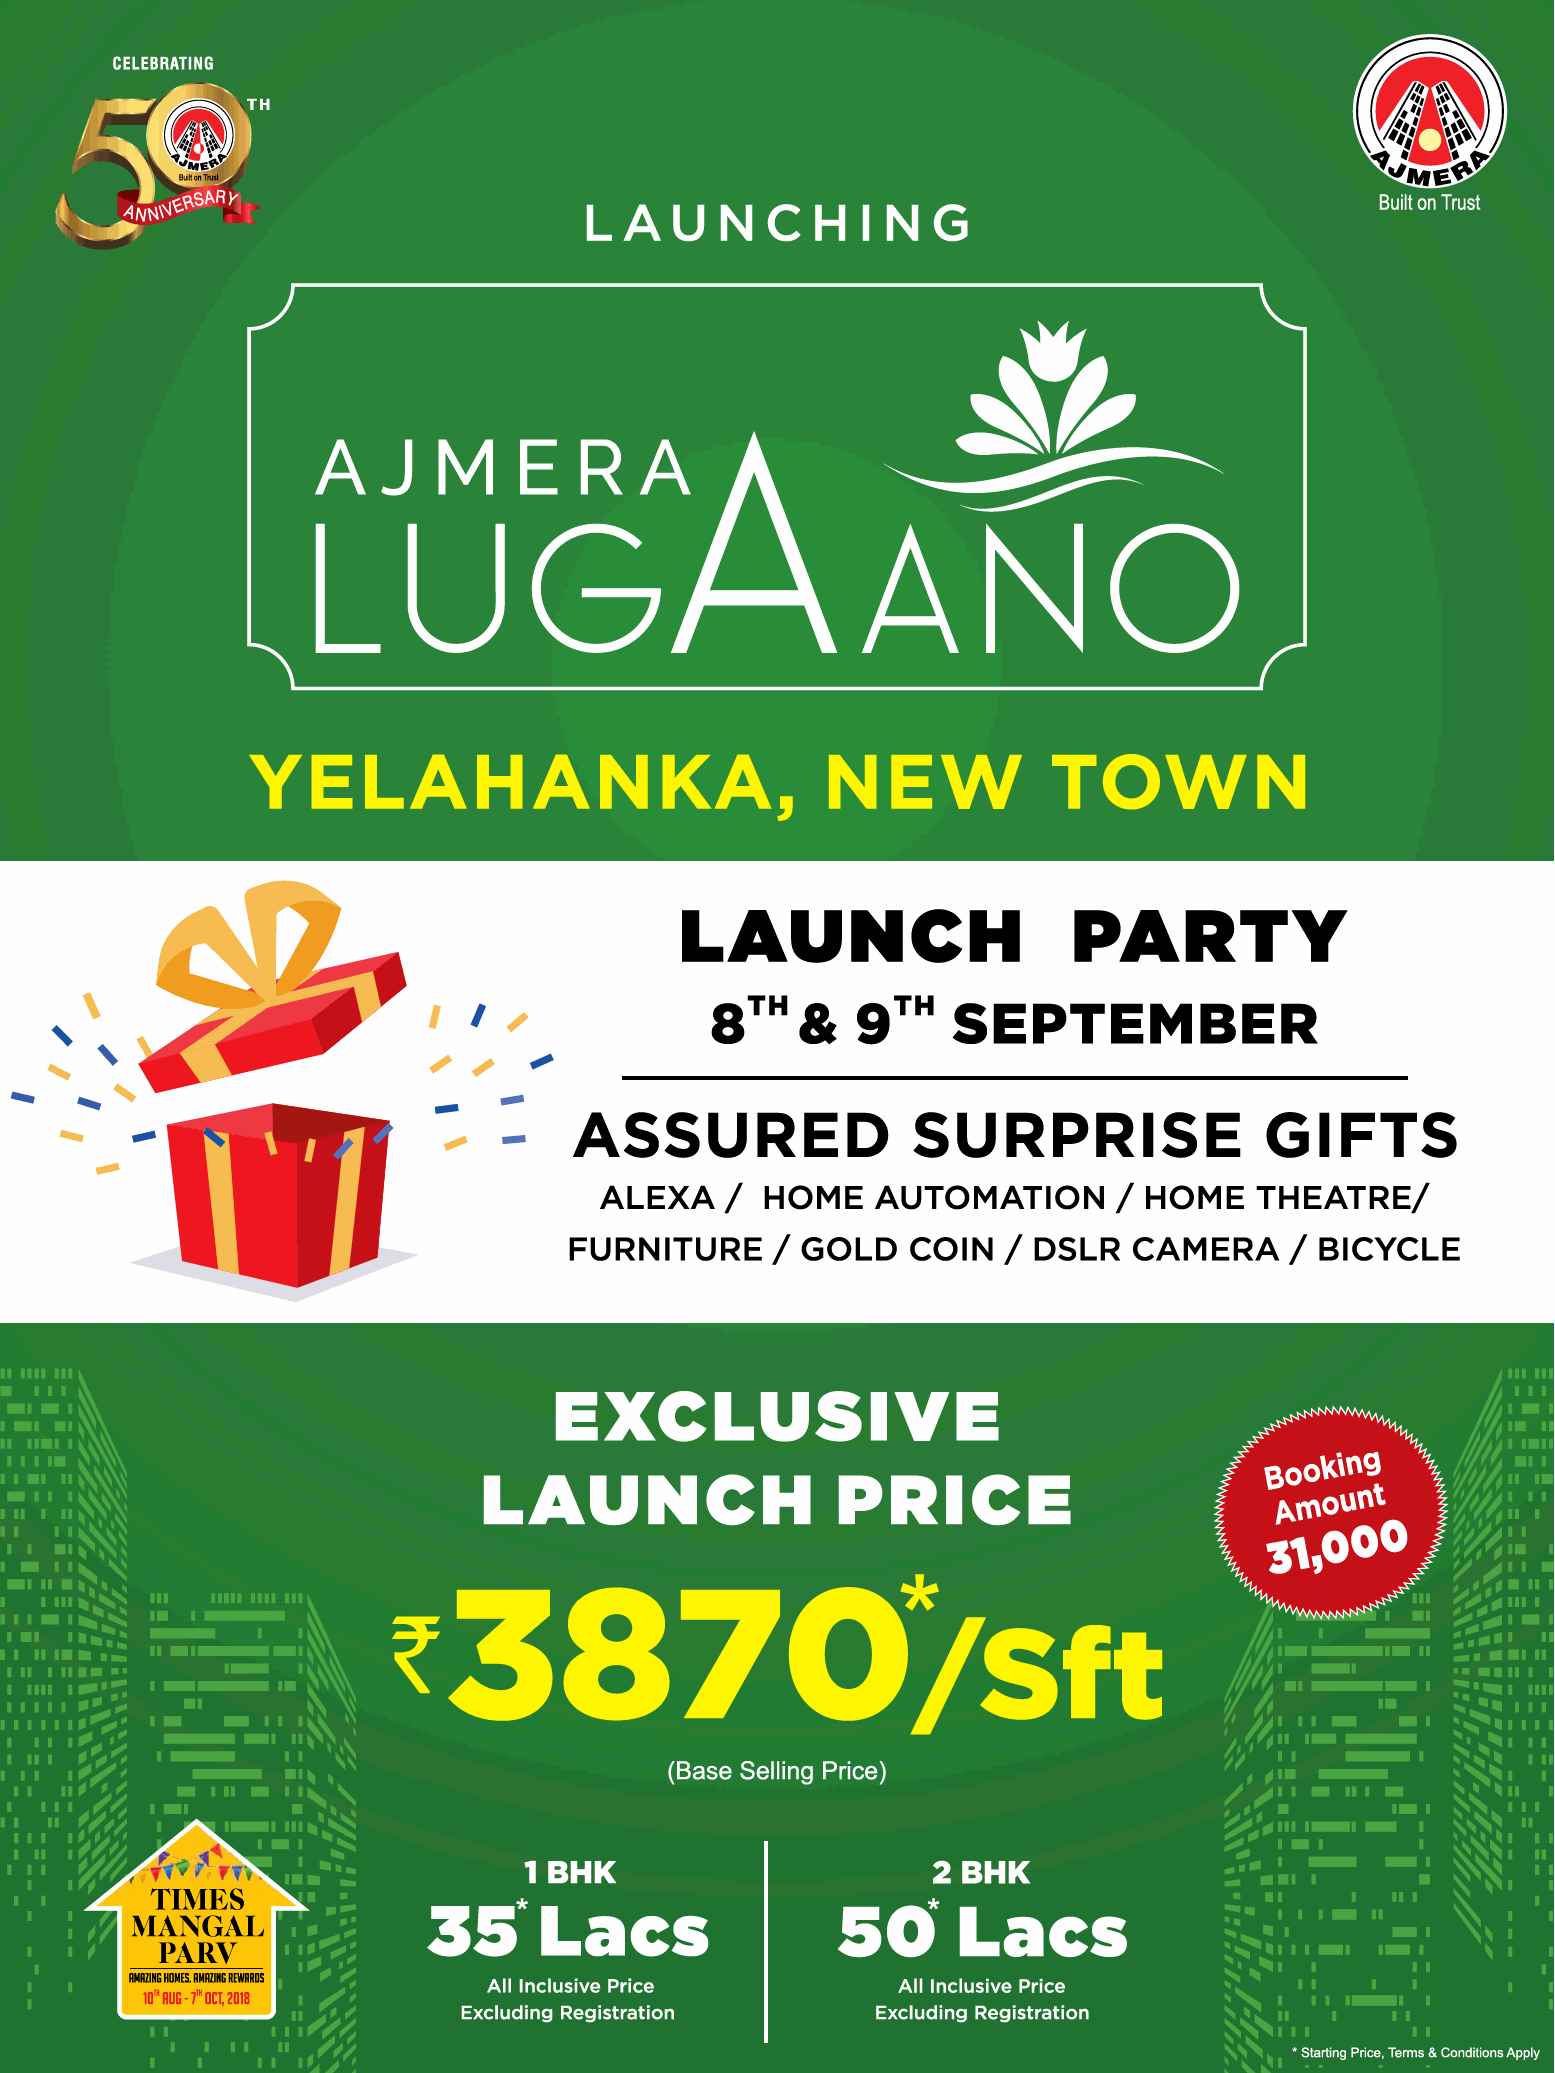 Avail exclusive launch price of Rs. 3870 per sqft at Ajmera Lugaano in Bangalore Update